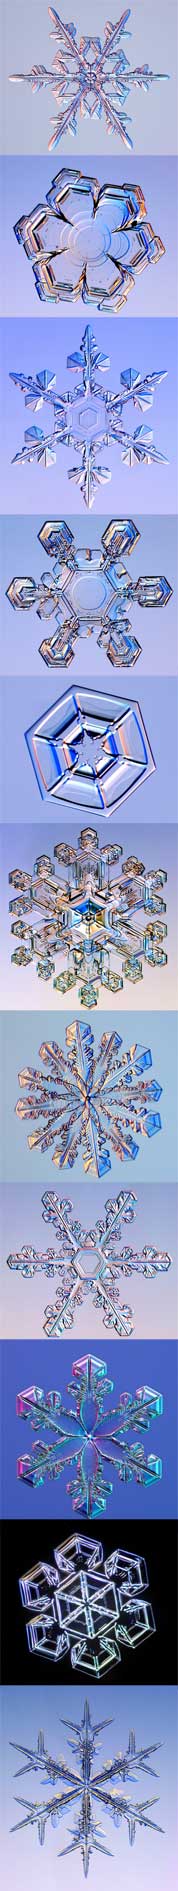 Photomicrographs of six different snow crystals.